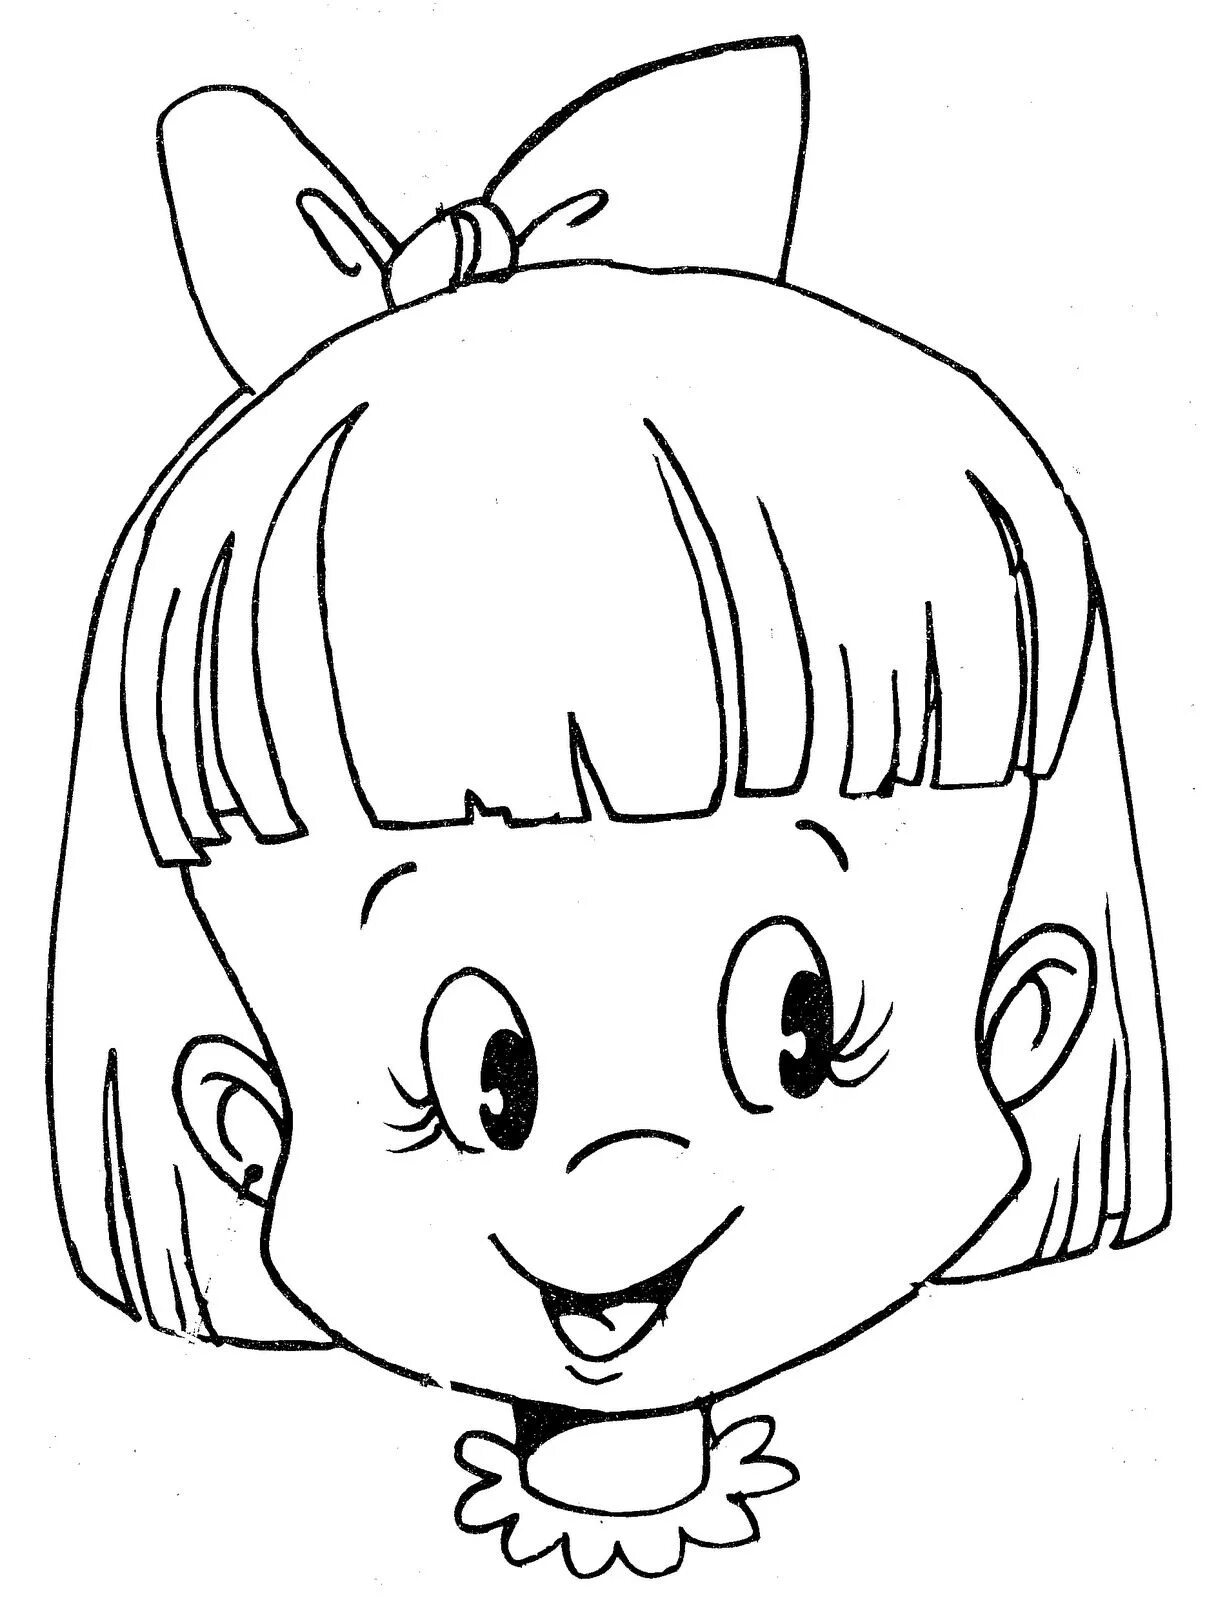 Shining baby face coloring book for kids